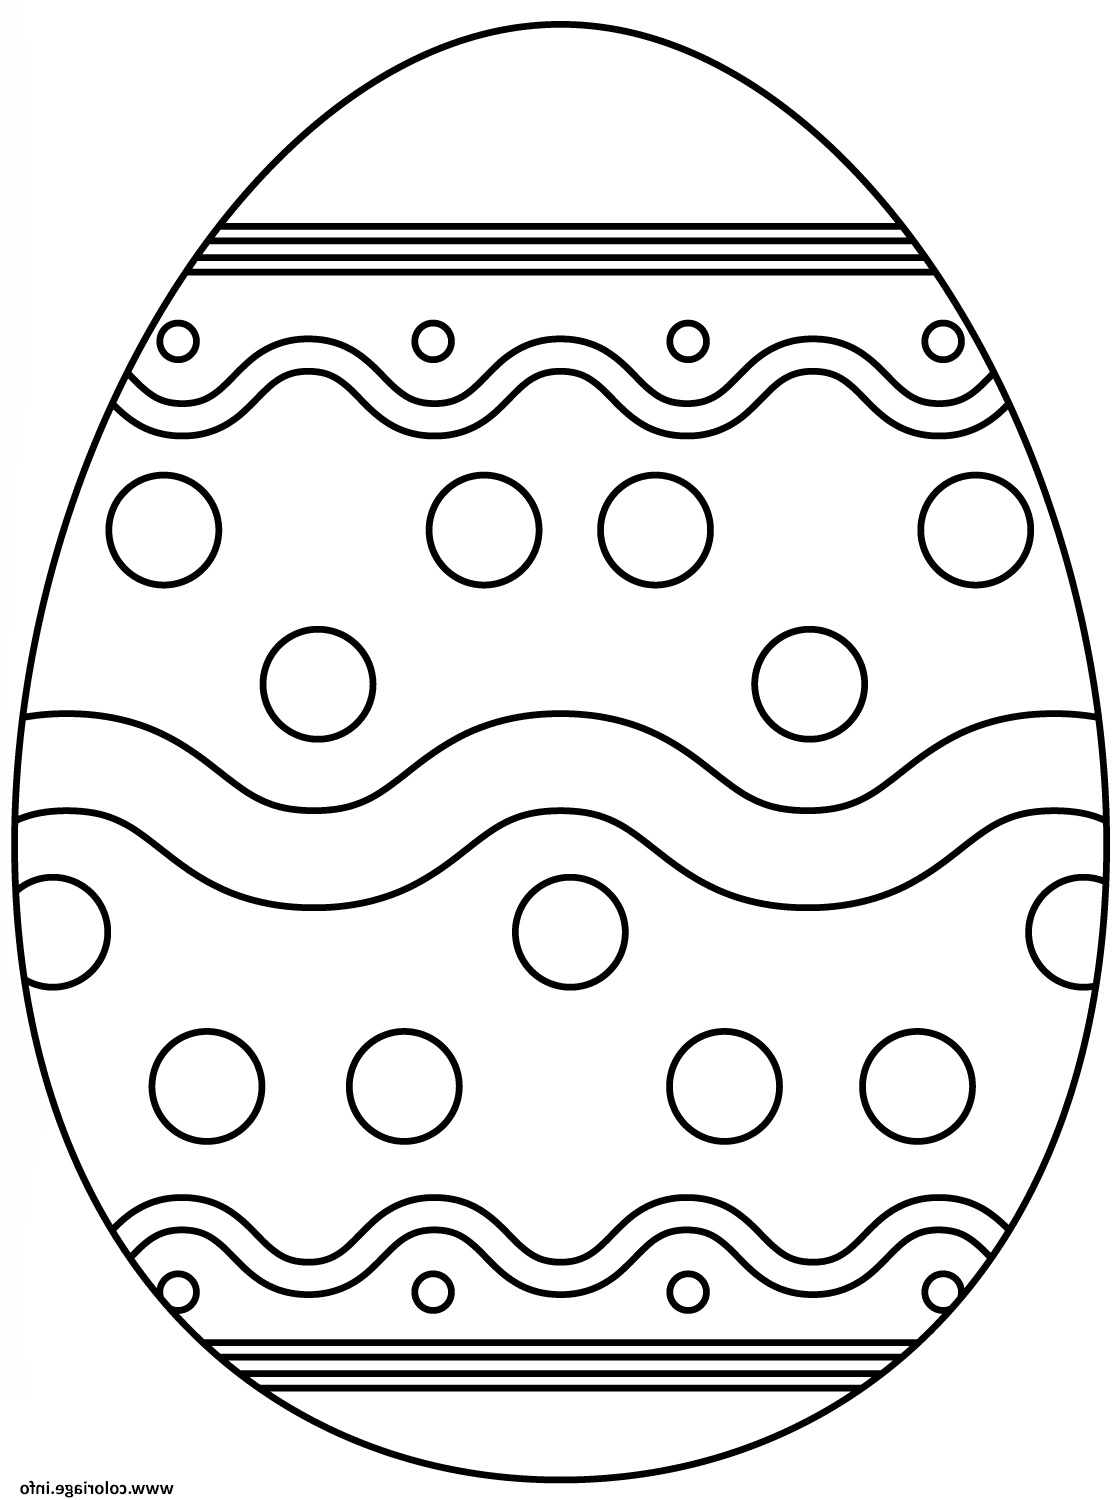 oeuf de paques avec abstract pattern 4 coloriage